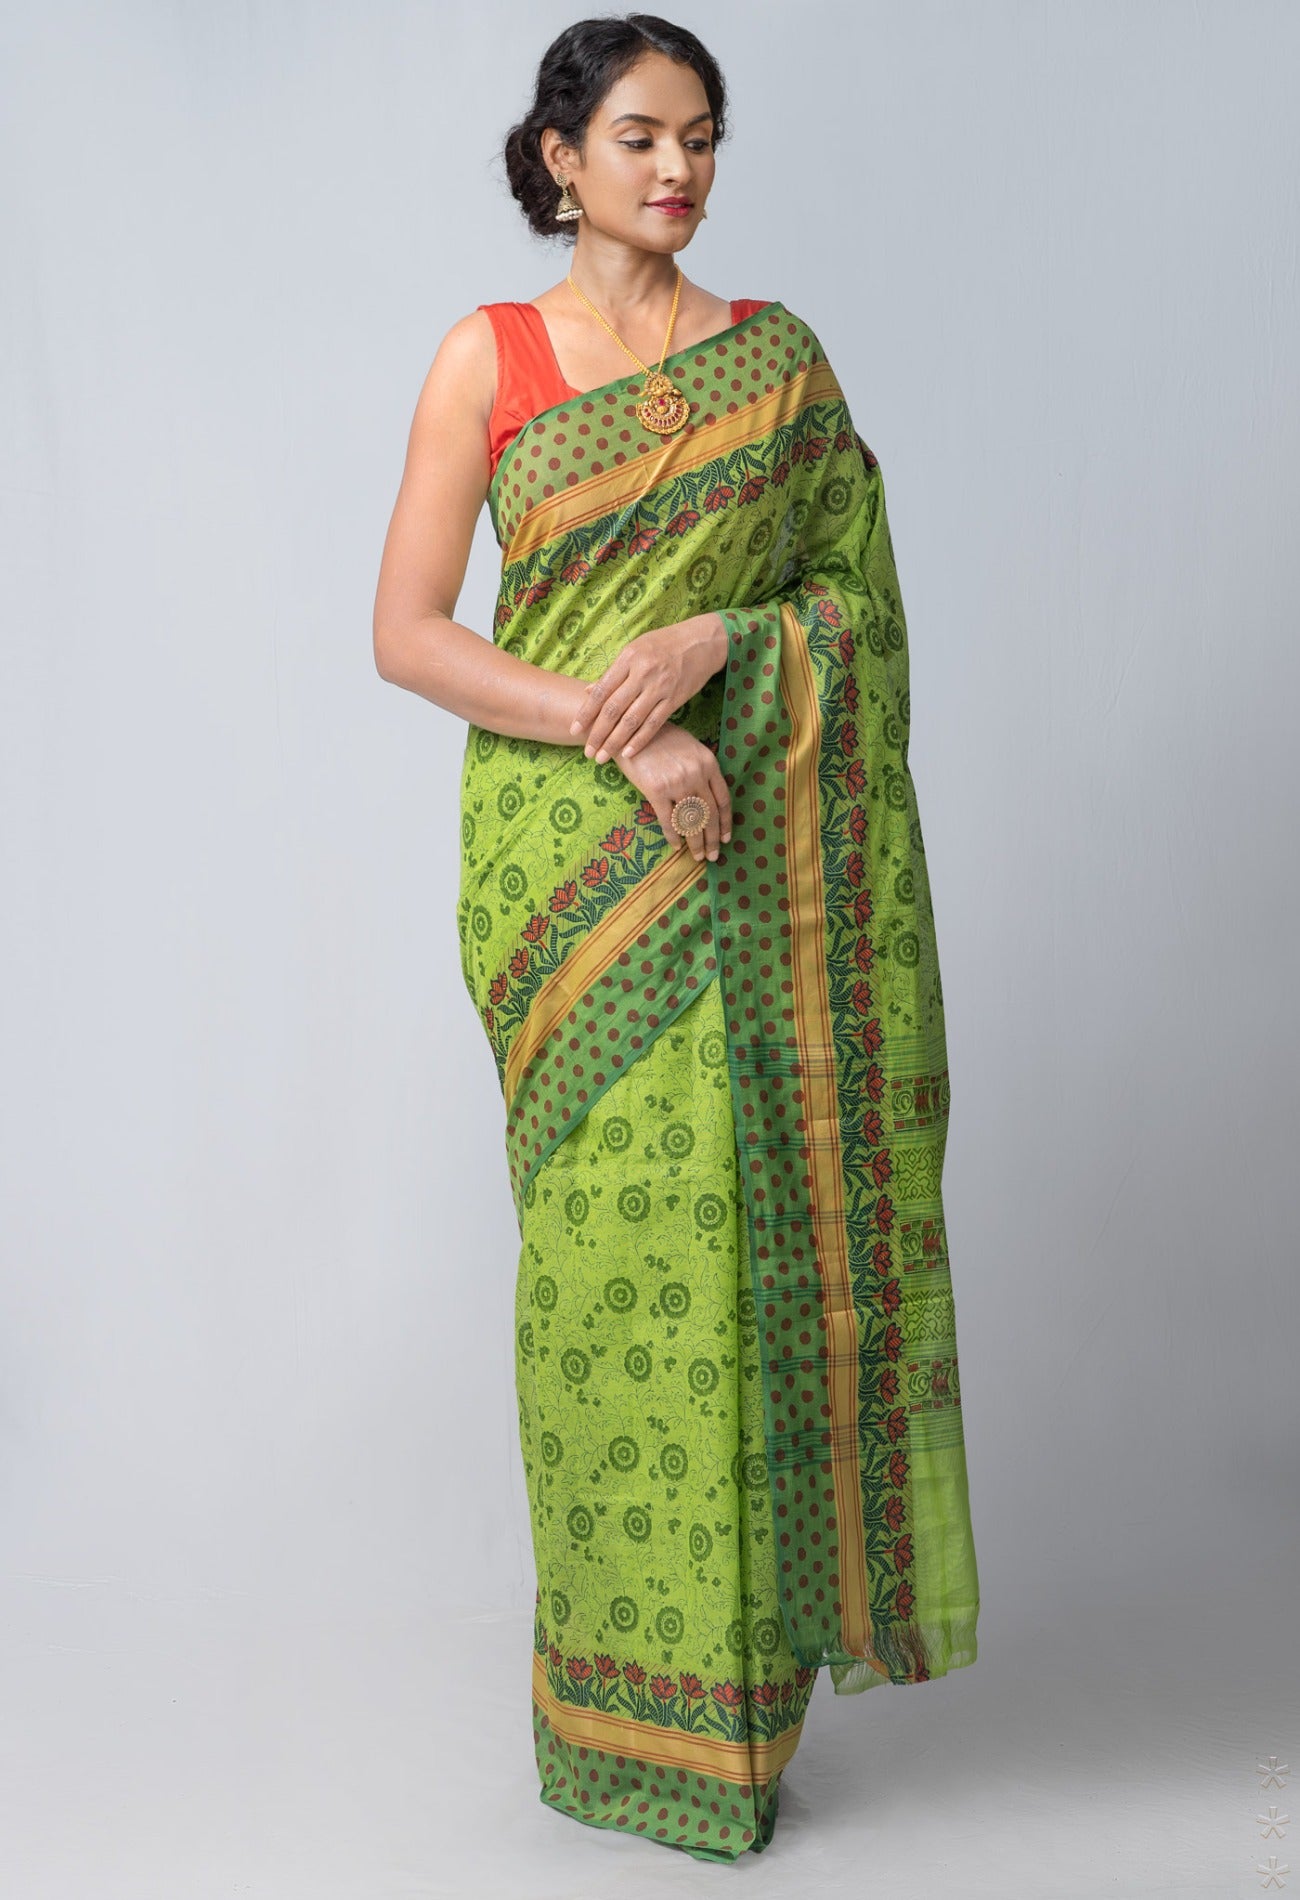 Online Shopping for Green  Block Printed Kanchi Cotton Saree with Hand Block Prints from Tamil Nadu at Unnatisilks.com India
